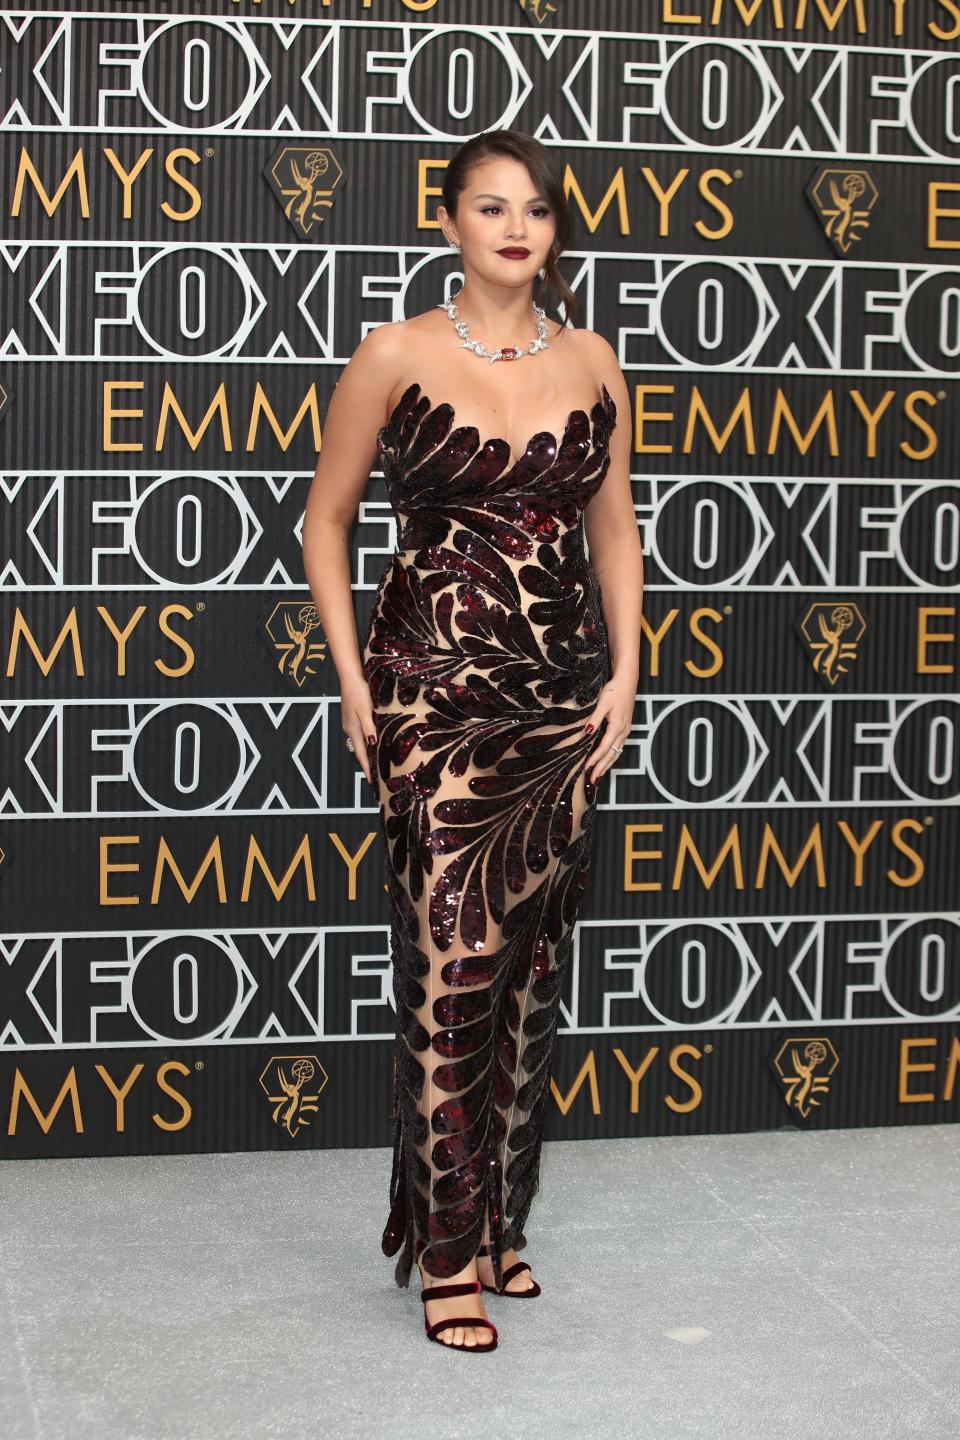 Selena Gomez on the 2024 Primetime Emmy Awards red carpet. Gomez will soon executive produce and make a cameo appearance in a reboot of "Wizards of Waverly Place," which catapulted her to fame.